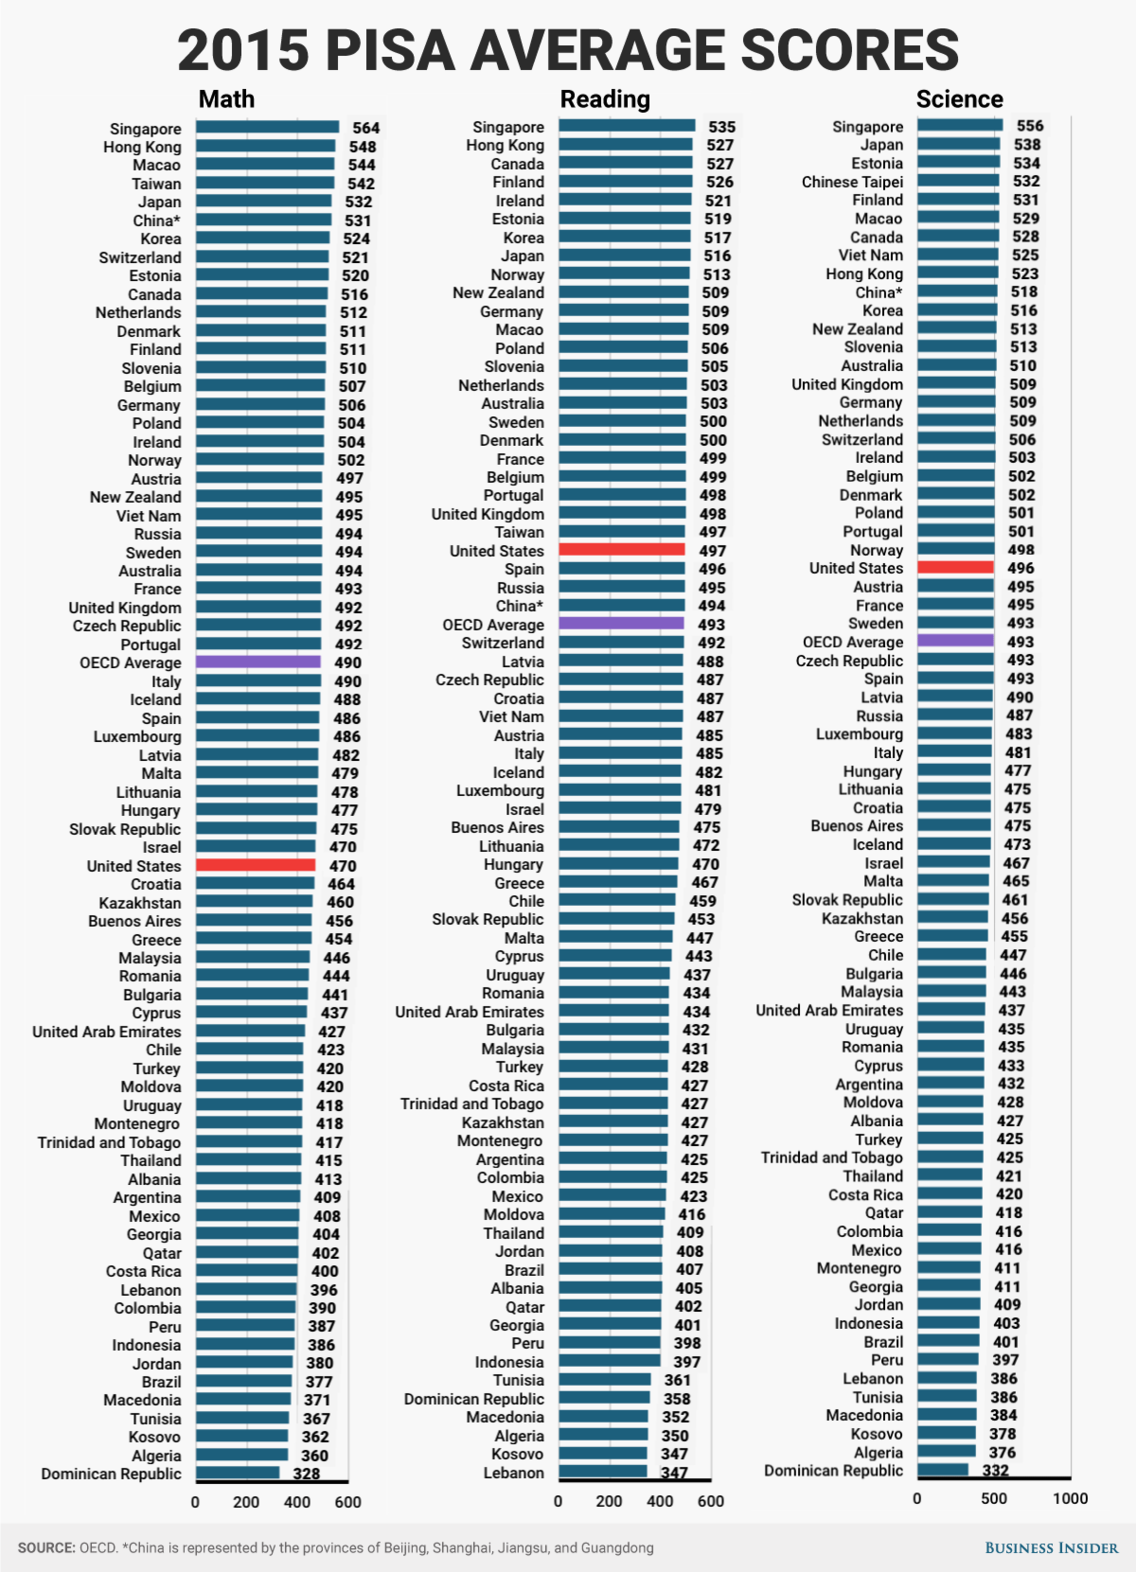 2015 Pisa Average Scores in Math, Reading and Science. They show the United States 24th in Reading and 25th in Science